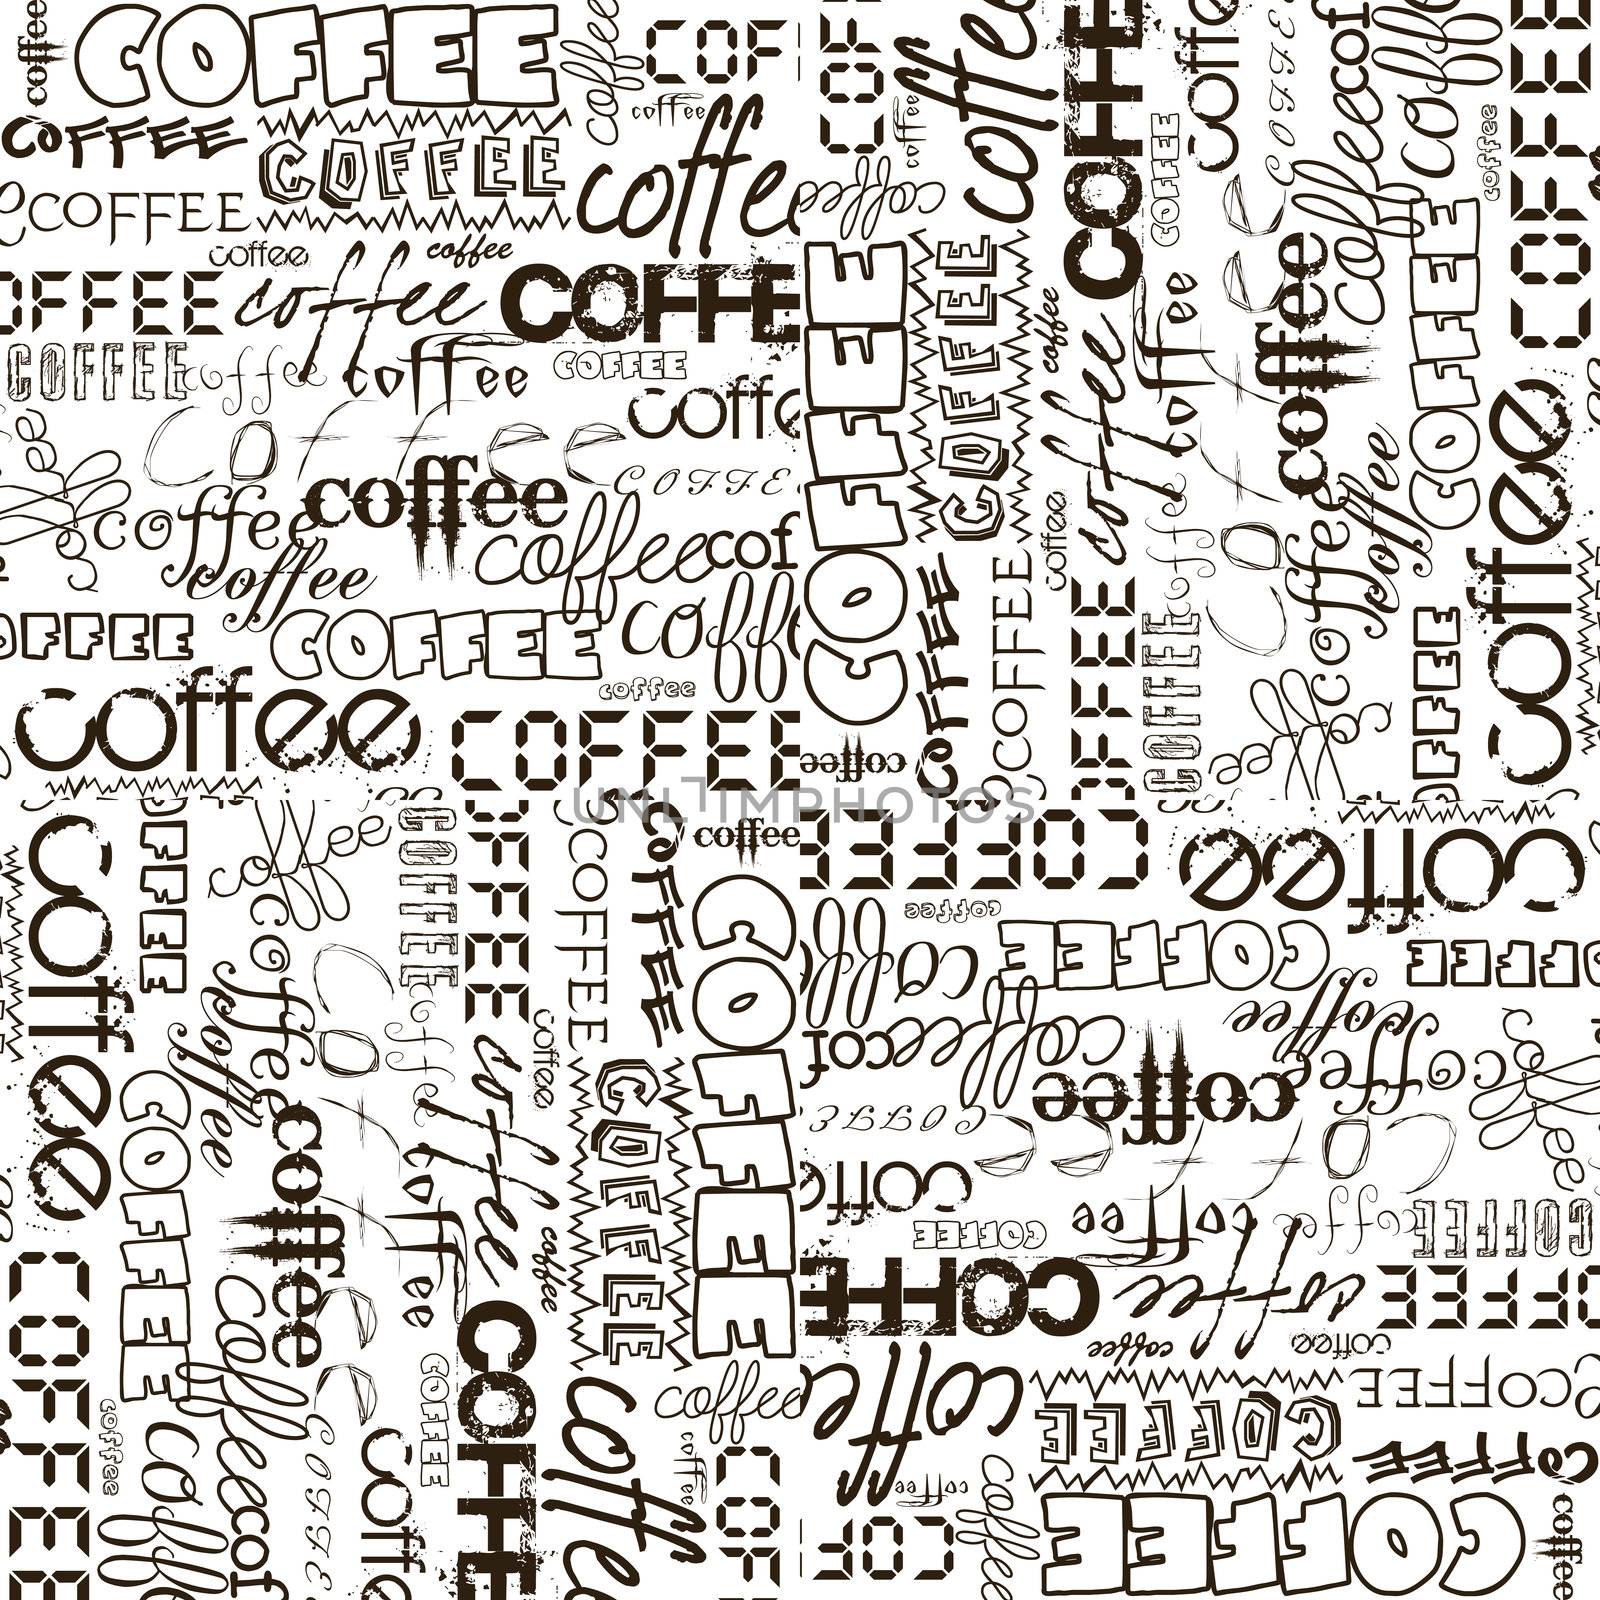 Background with coffee advertising by hibrida13